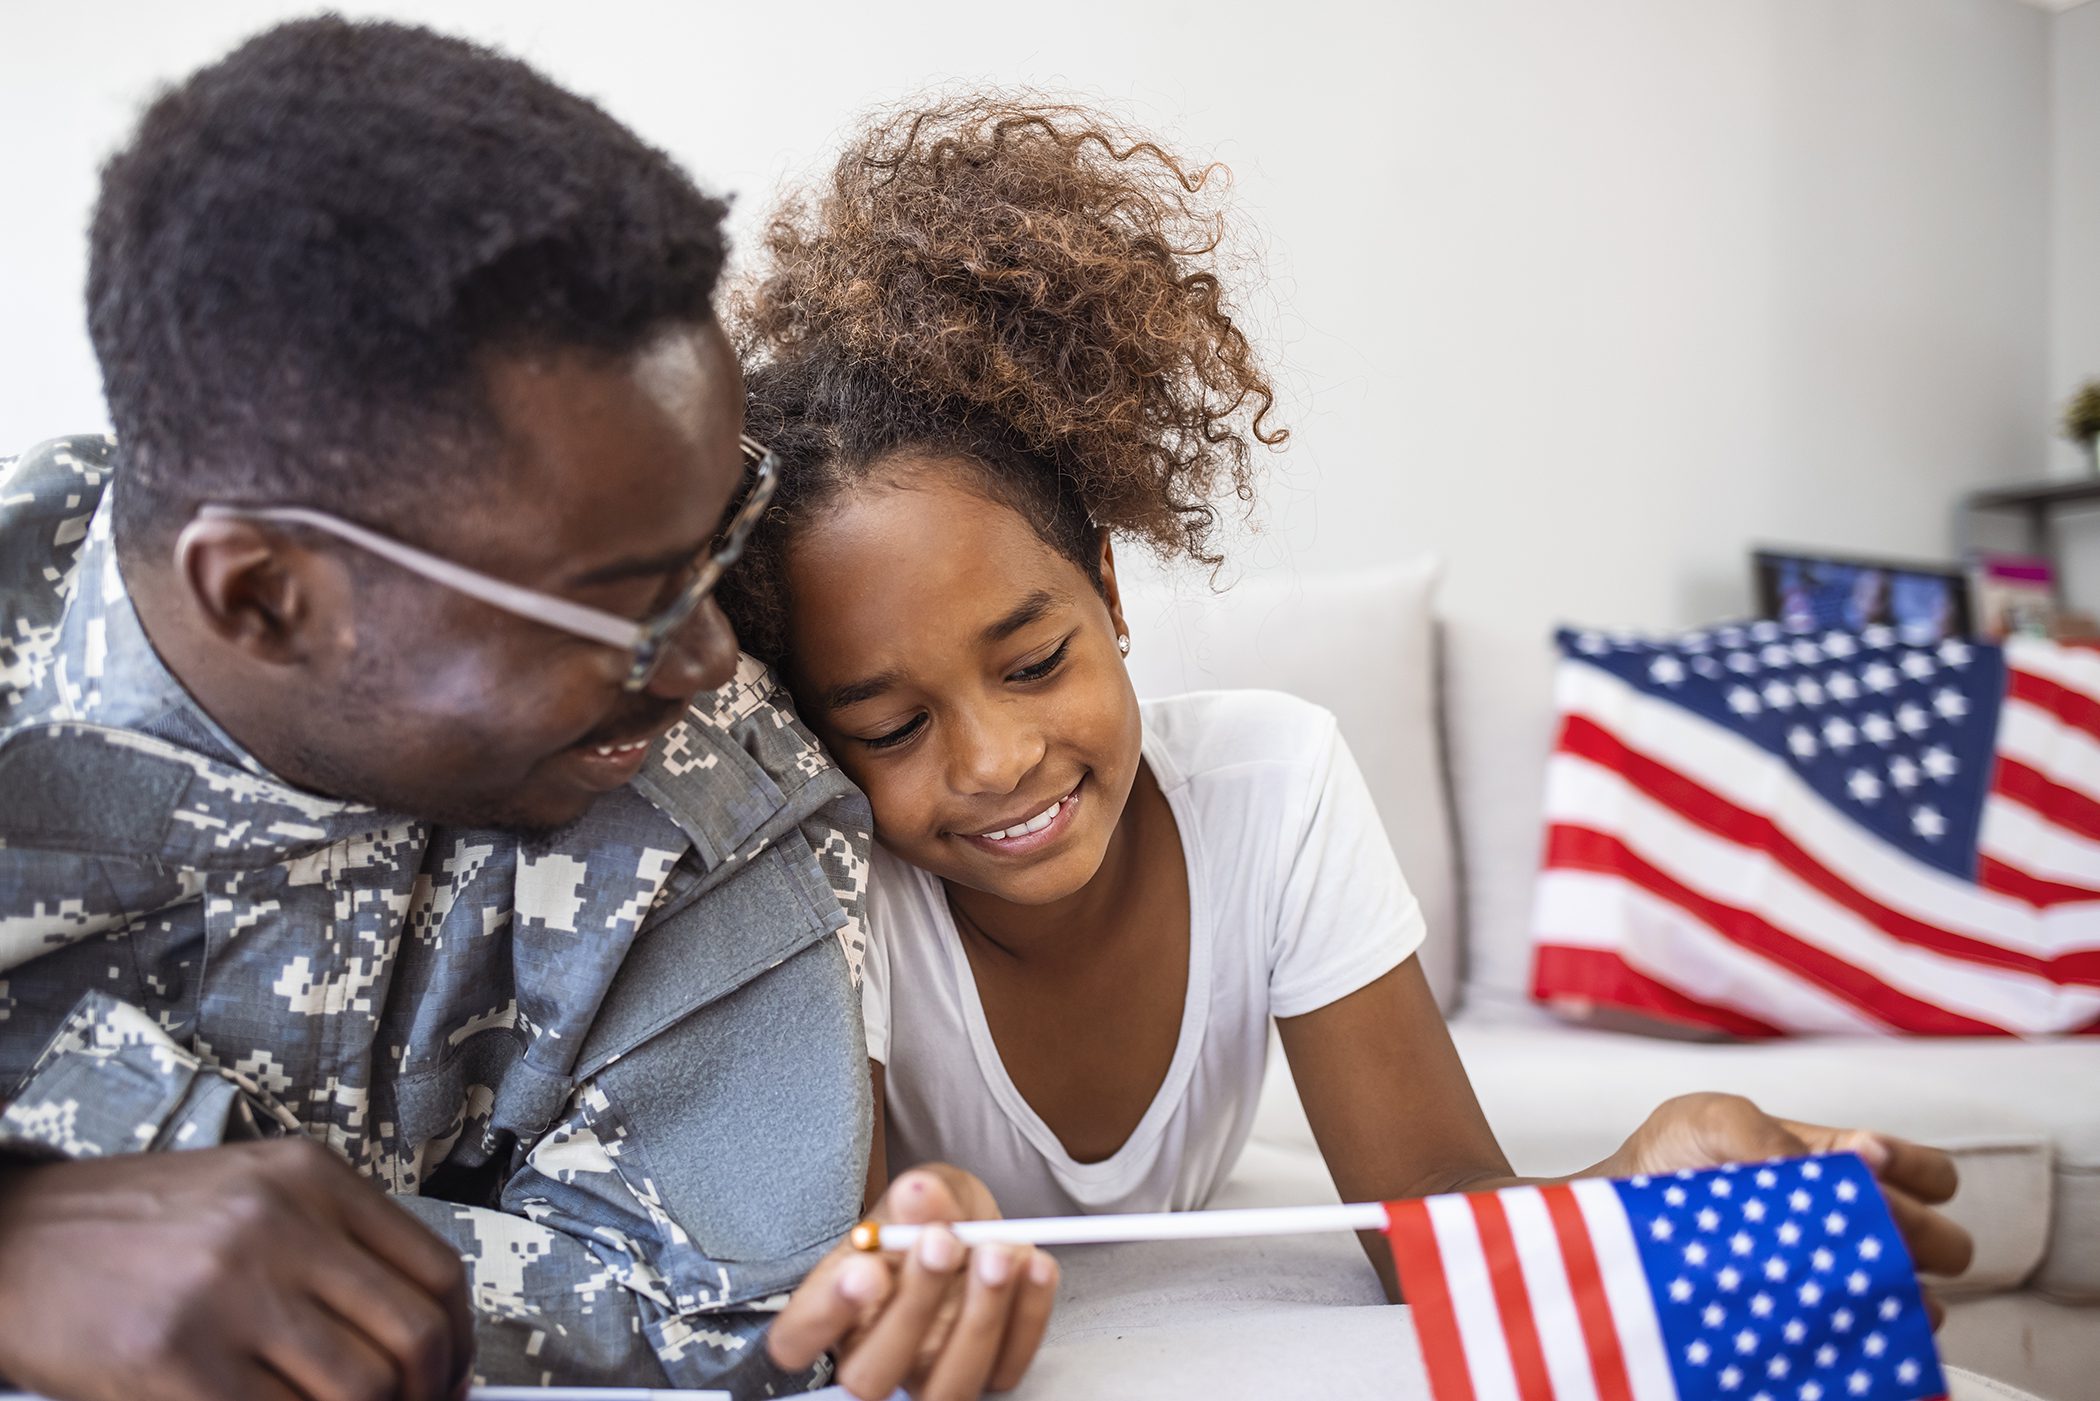 Portrait of happy american family father in military uniform and cute little girl daughter with flag of United States hugging and smiling at camera, male soldier dad reunited with family at home